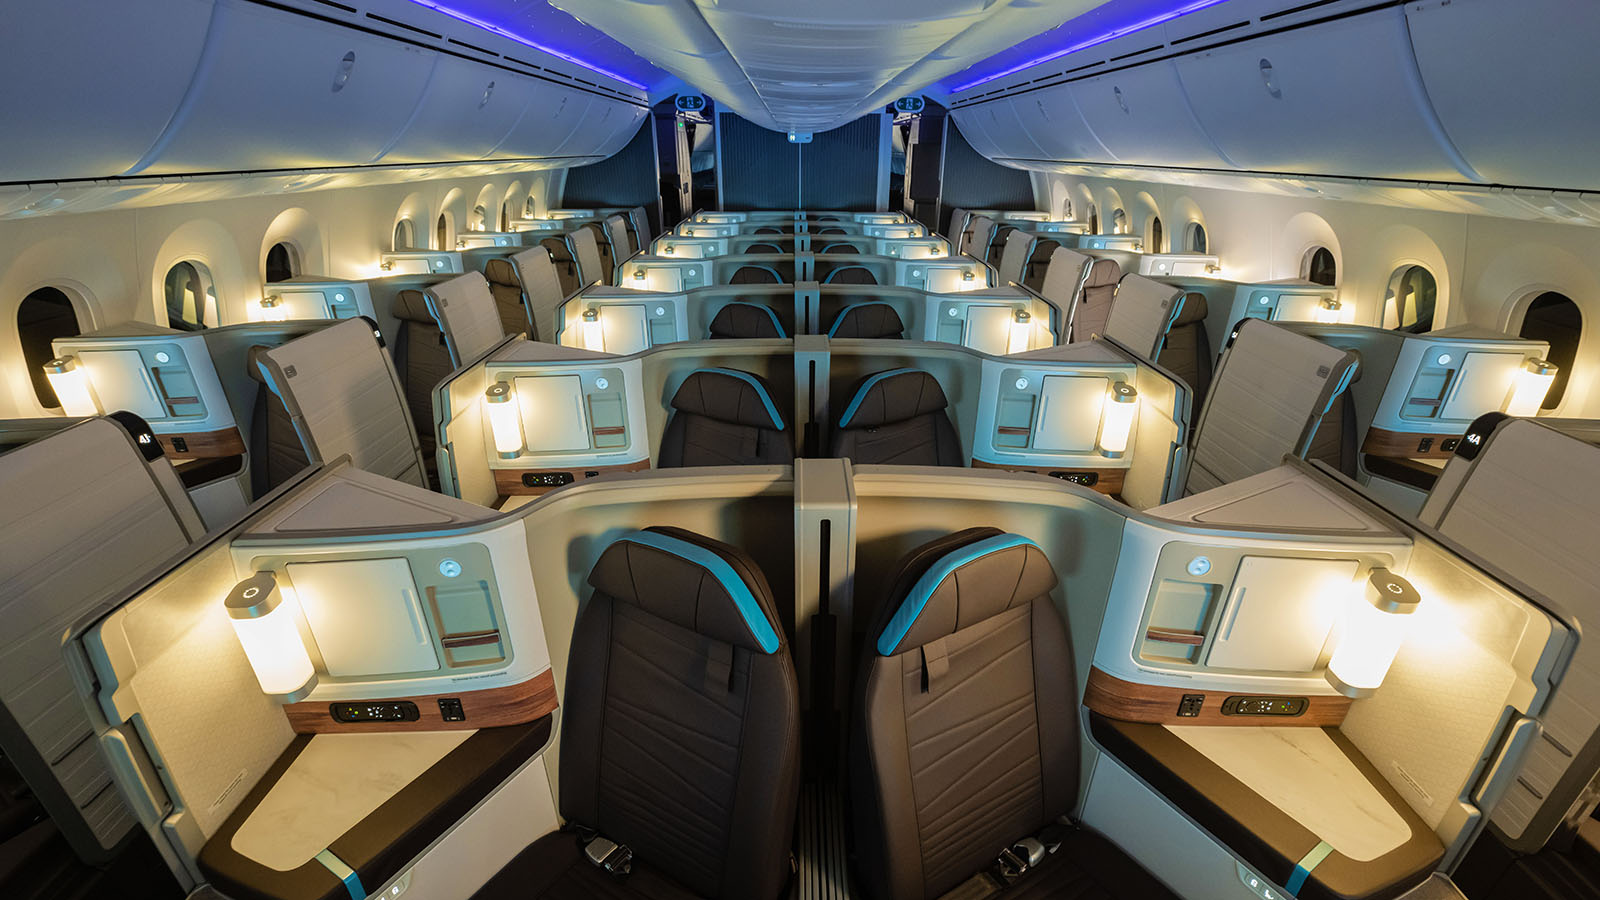 Business Class cabin on the Hawaiian Airlines Dreamliner